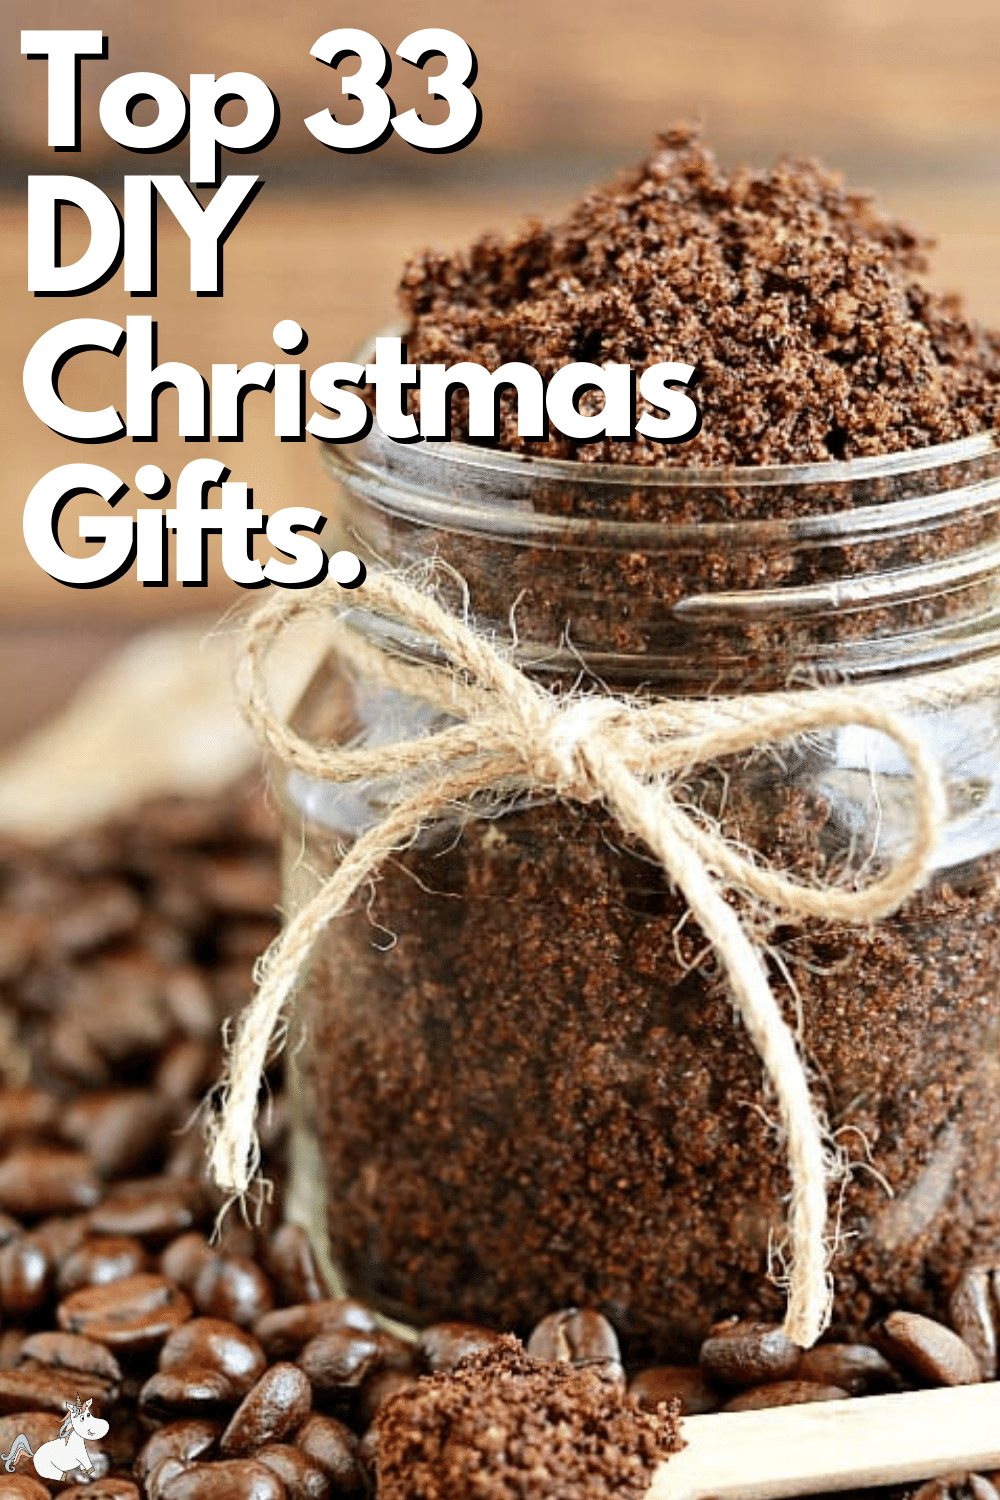 33 DIY Christmas gifts like these are the answer when you want to give meaningful gifts that you're friends & family will love without breaking the bank!